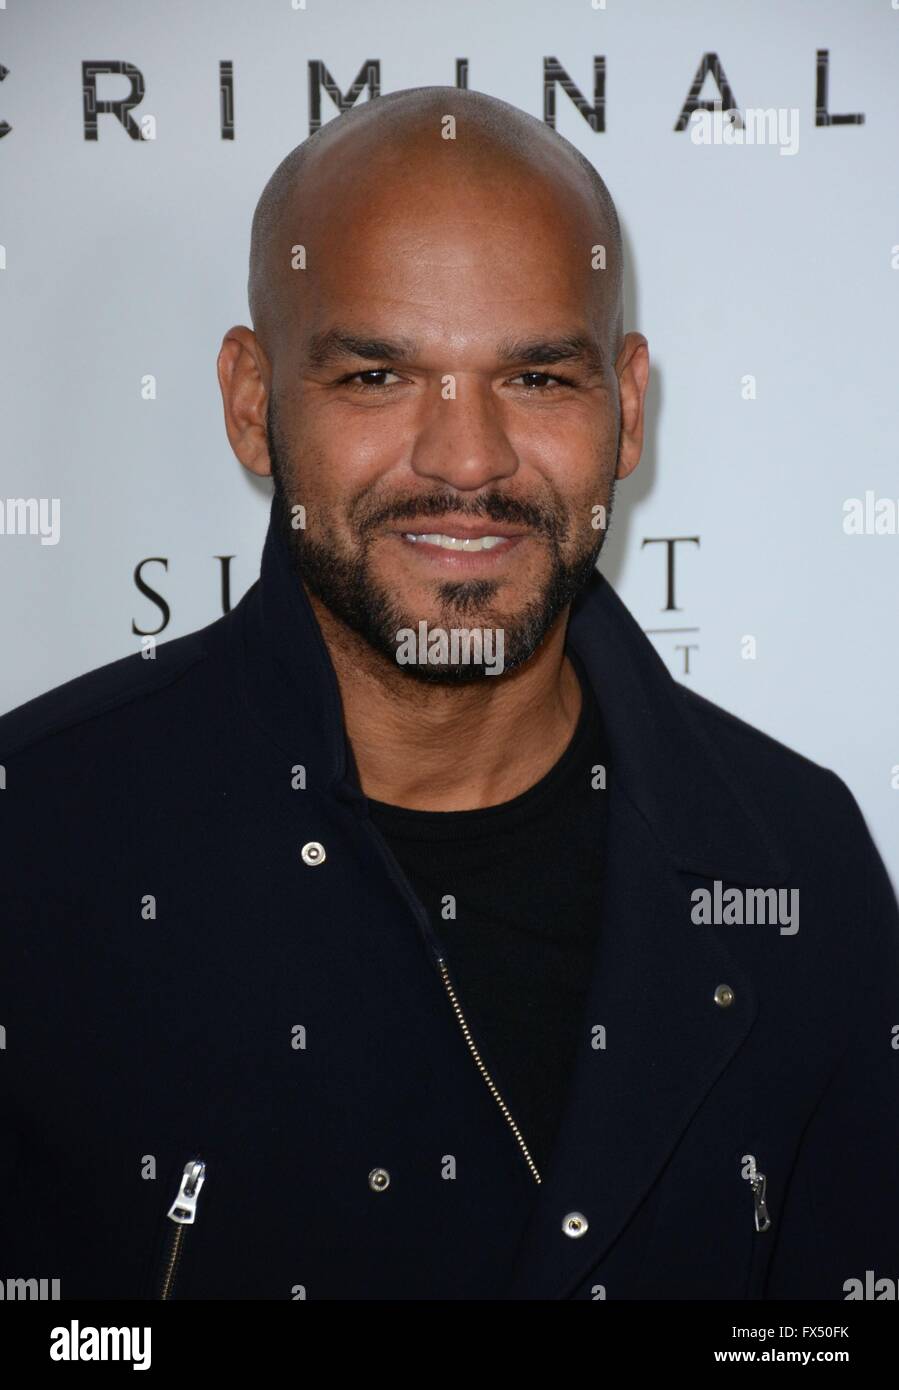 New York, NY, USA. 11th Apr, 2016. Amaury Nolasco at arrivals for CRIMINAL Premiere, AMC Loews Lincoln Sqaure, New York, NY April 11, 2016. Credit:  Derek Storm/Everett Collection/Alamy Live News Stock Photo